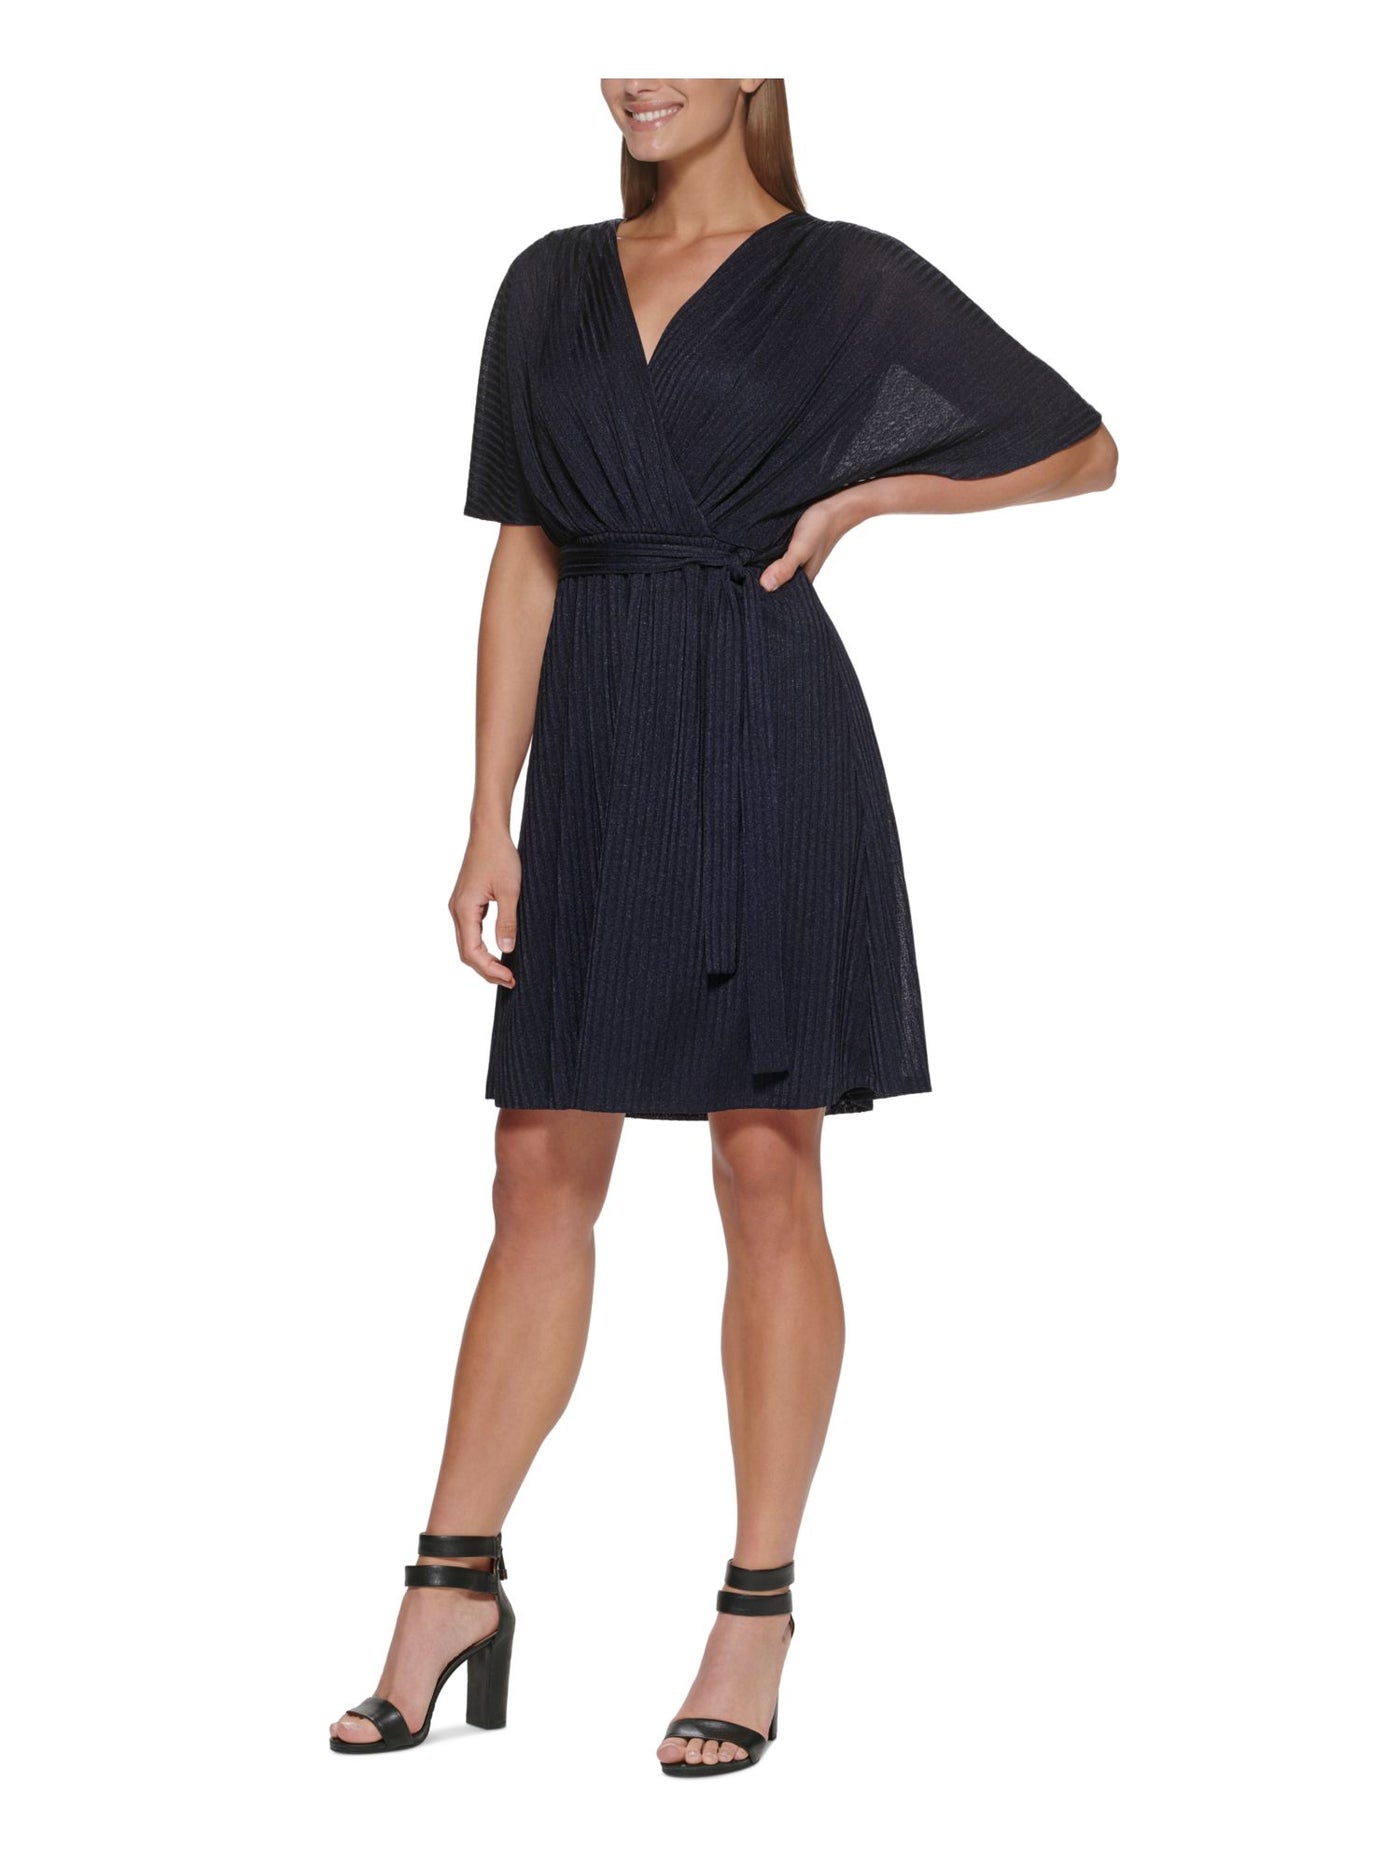 DKNY Womens Navy Stretch Zippered Belted Lined Short Sleeve Surplice Neckline Above The Knee Wear To Work Sheath Dress 4